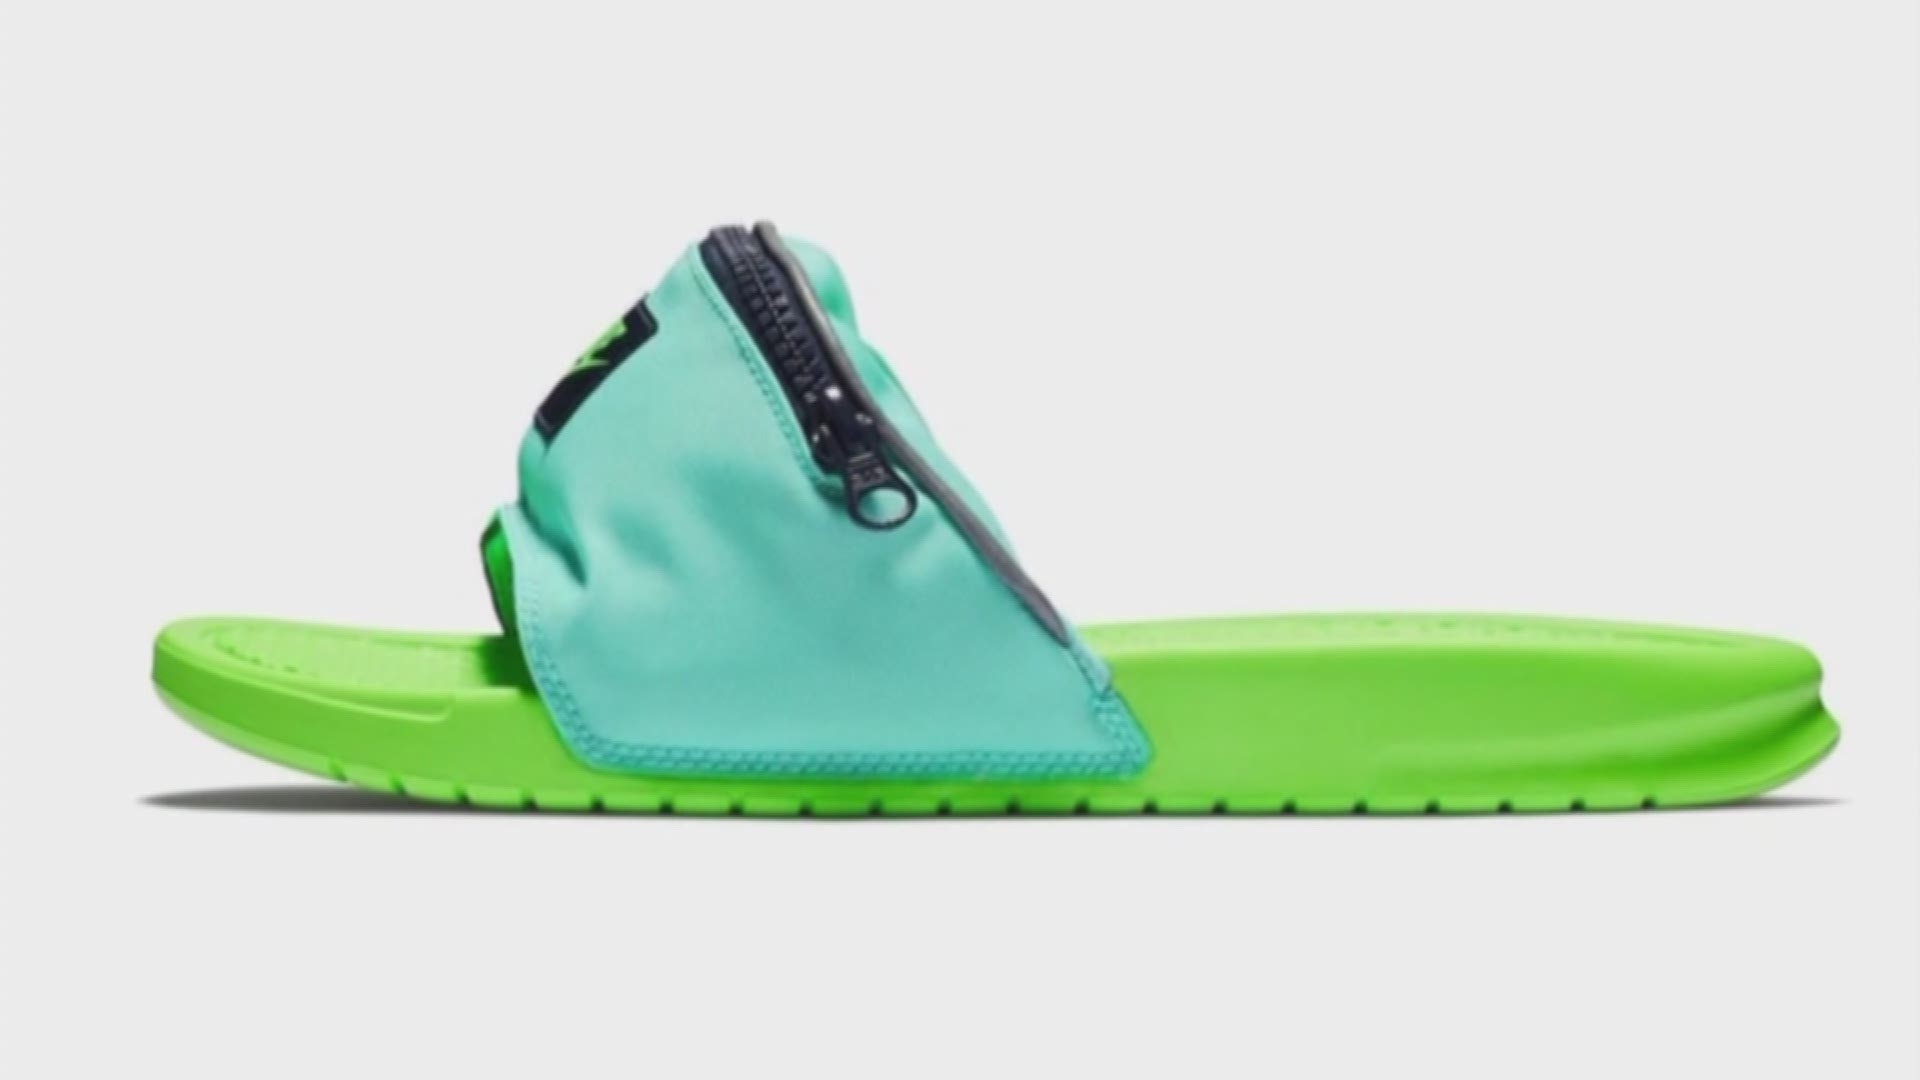 Nike's fanny pack sliders are taking 